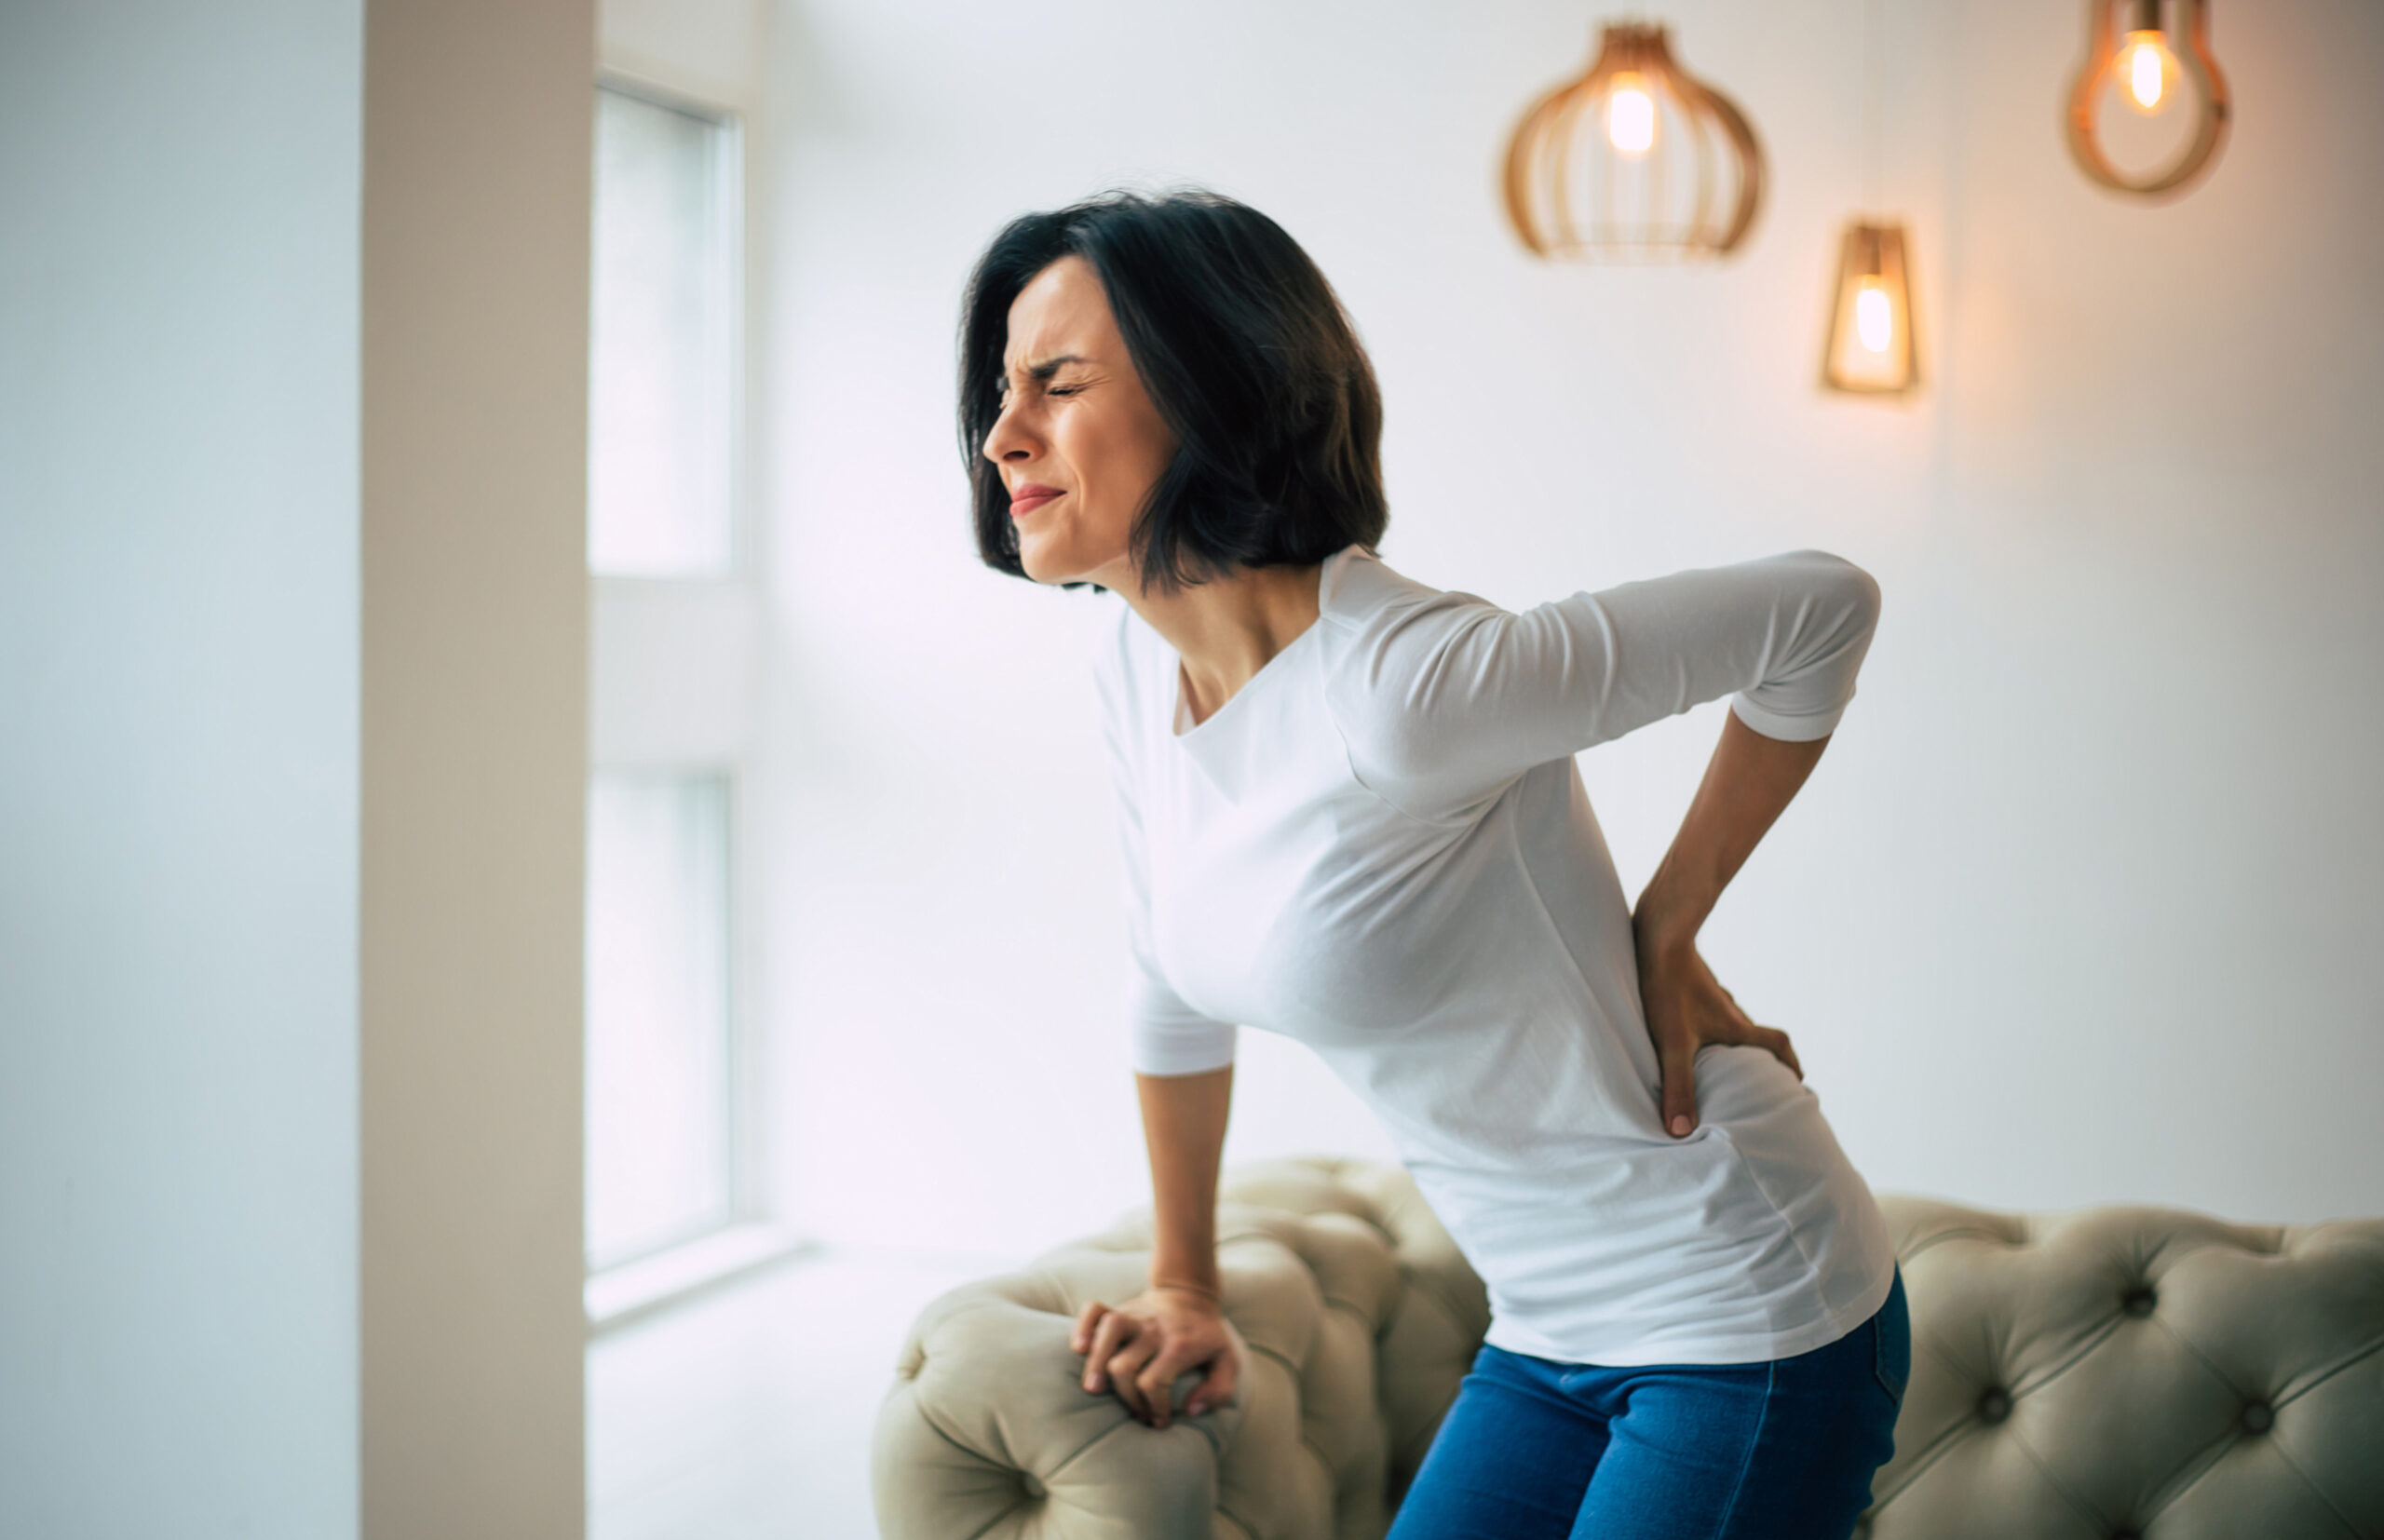 6 Things to Do if You Suffer From Chronic Pain